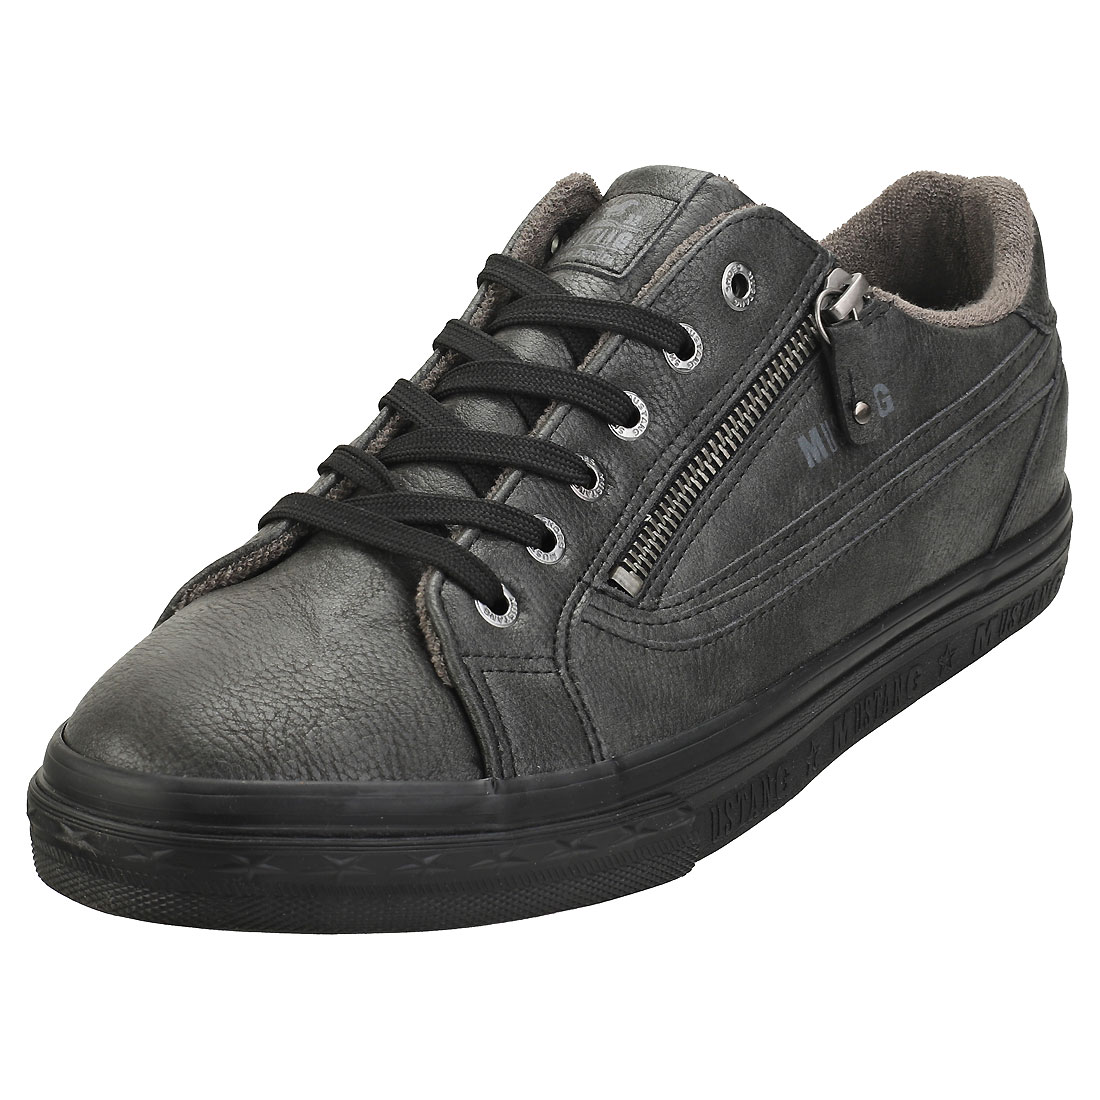 mens trainers with zip on the side